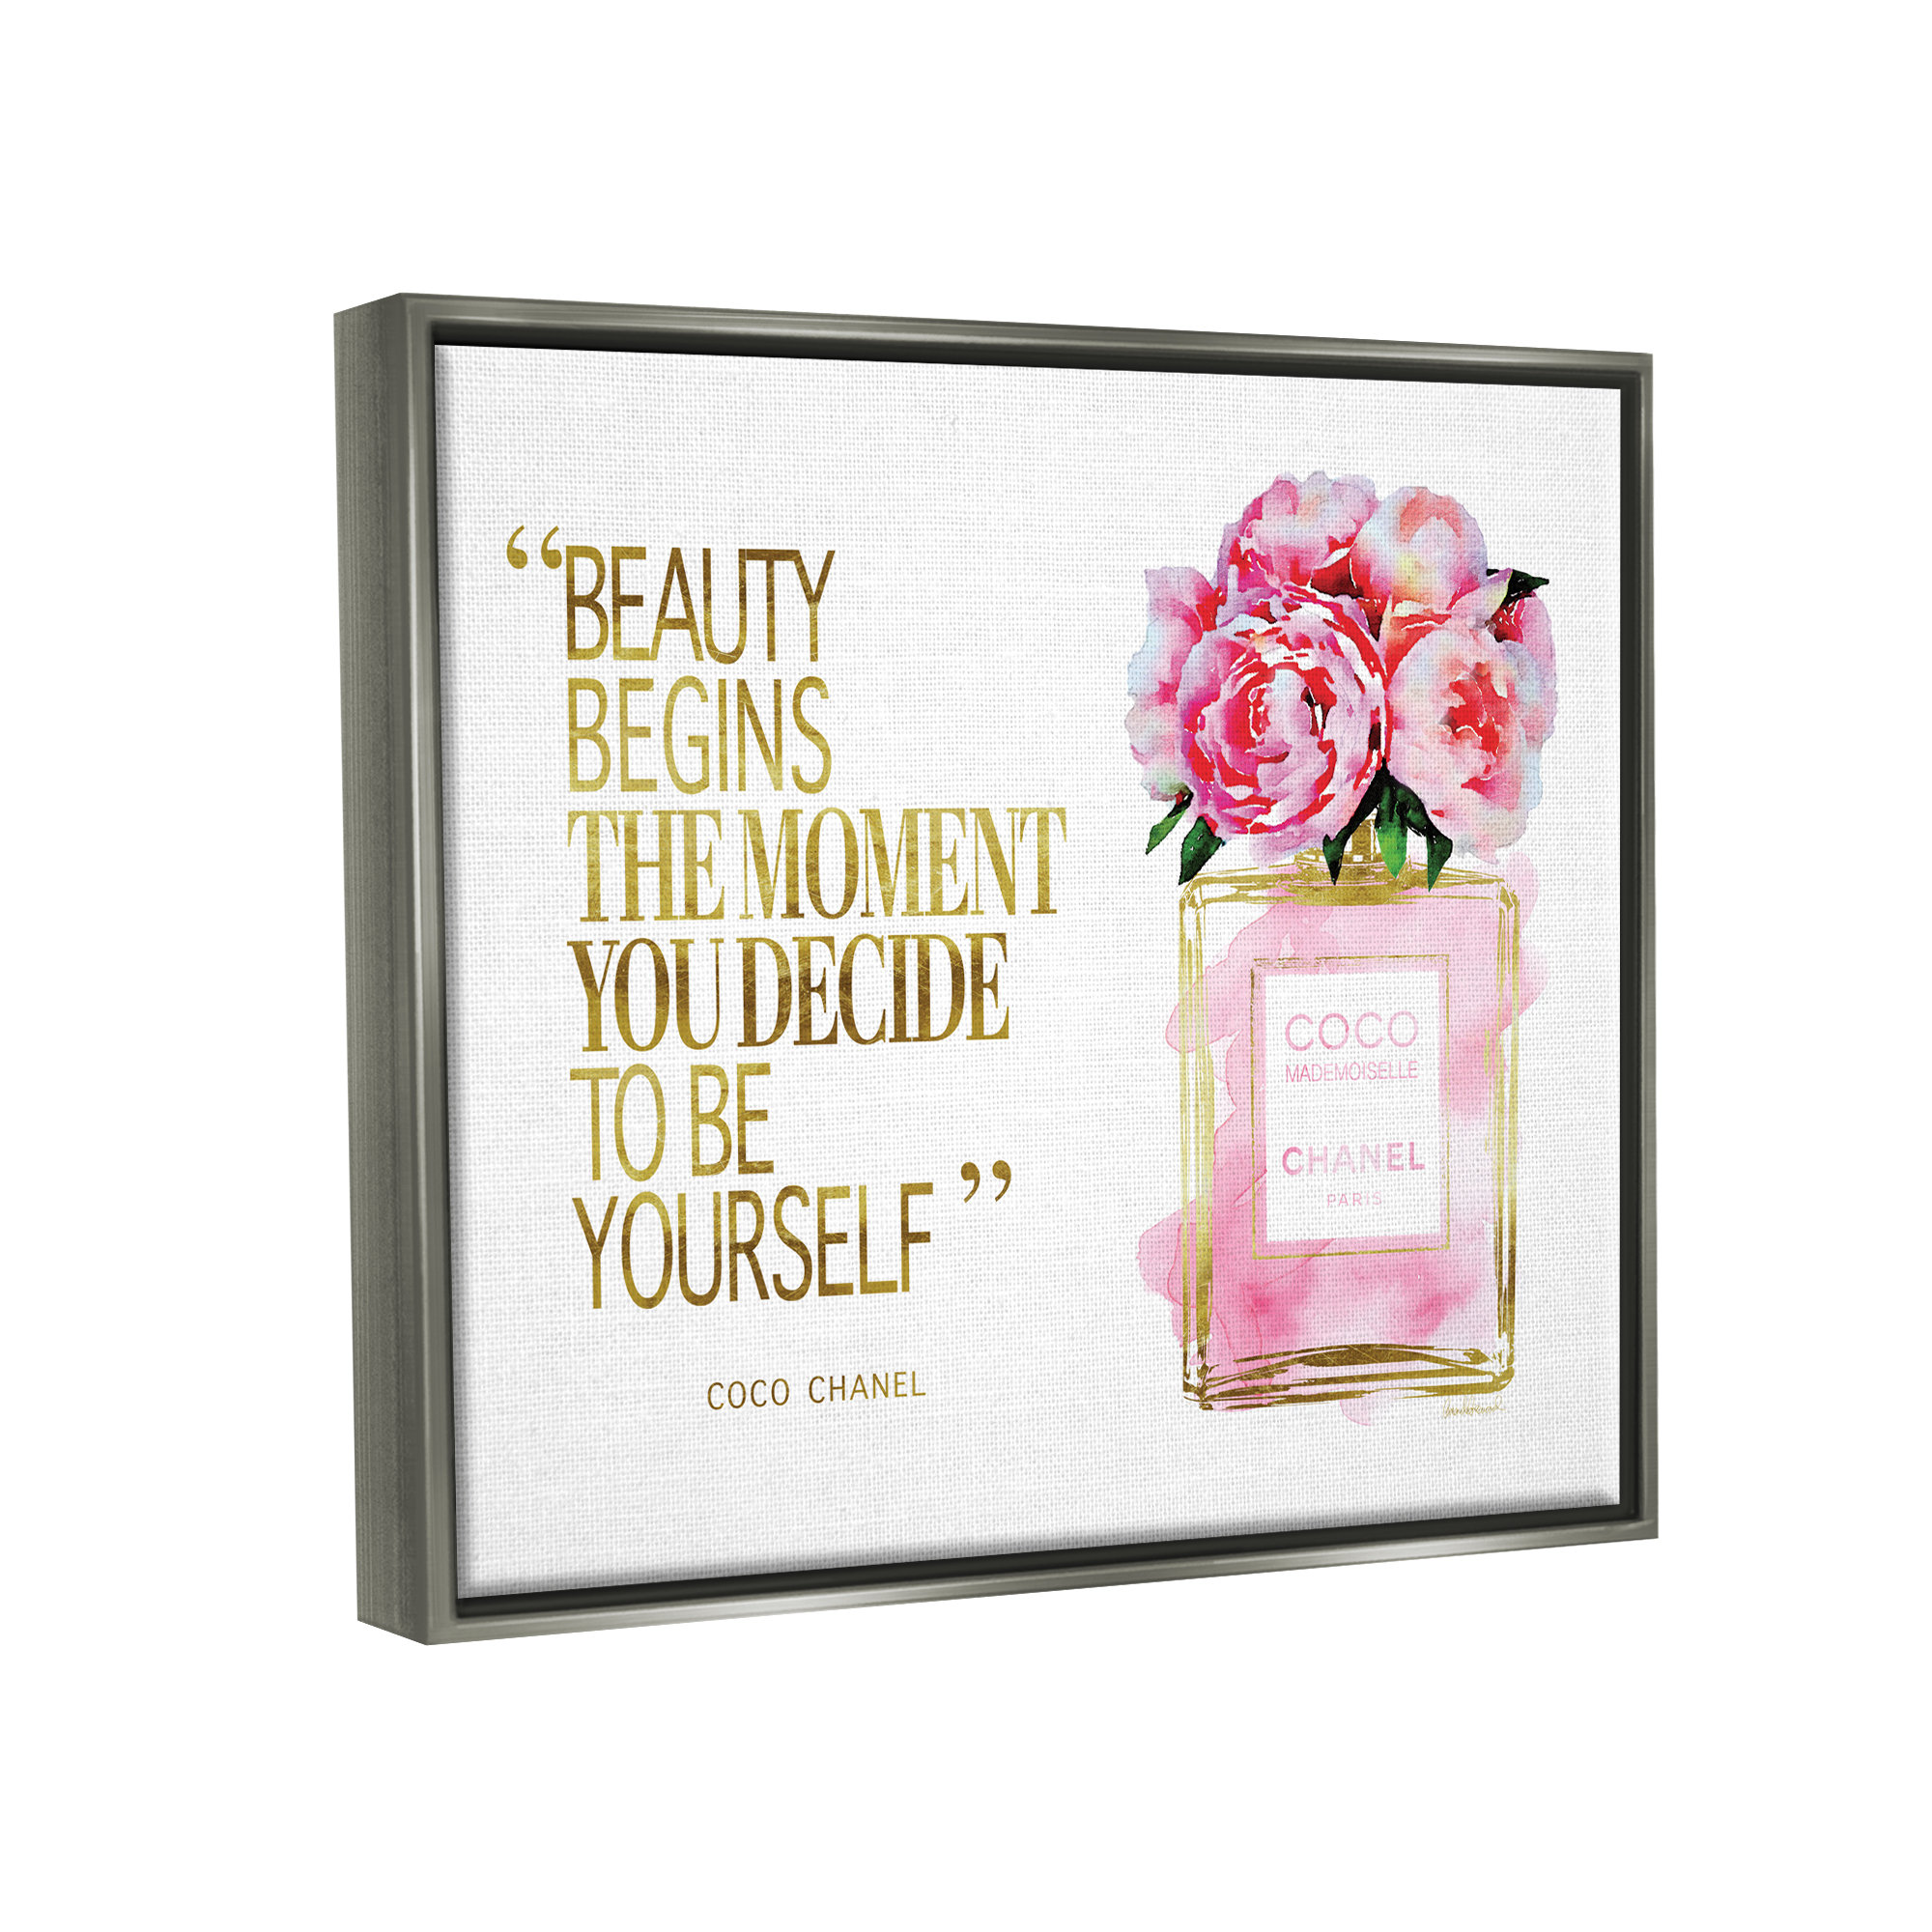 Coco Chanel quote pink watercolor Poster by Mihaela Pater - Fine